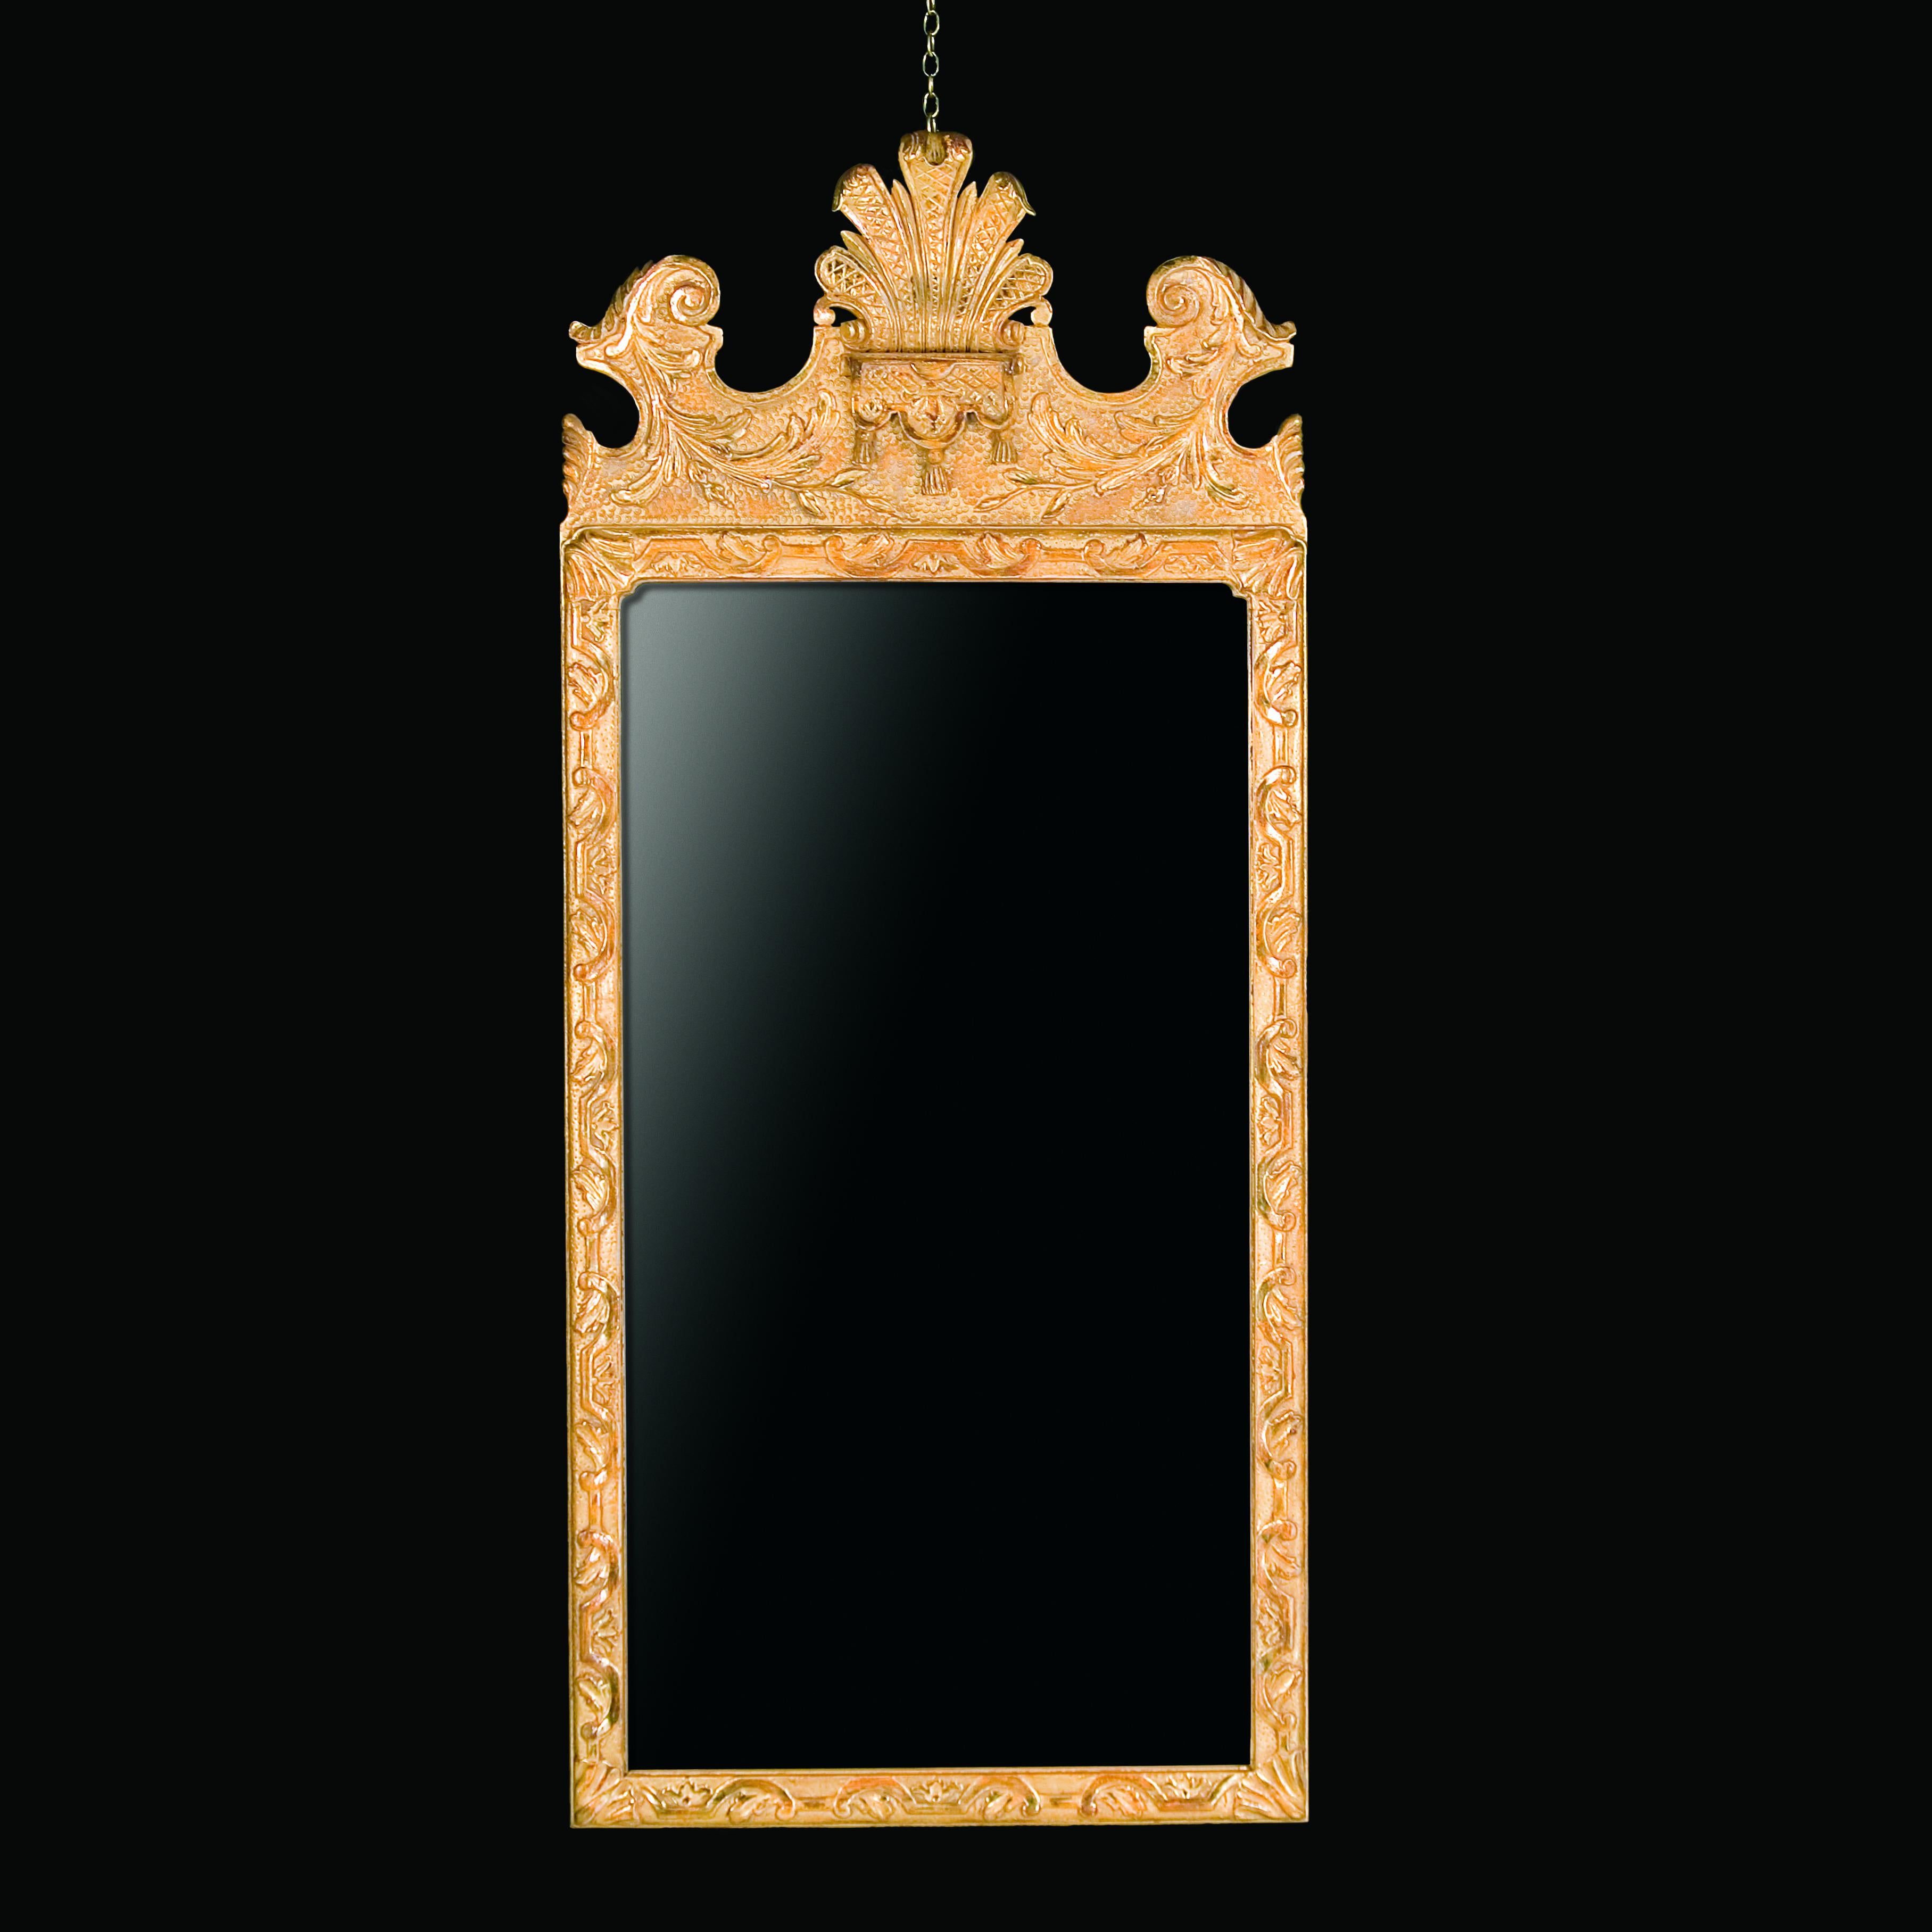 The oblong mirror plate is within a moulded frame carved with interlaced strapwork and leaves on a punched ground.

Bespoke sizing, design adaptations and finishing available.

We are currently working to a 30-36 week lead time.